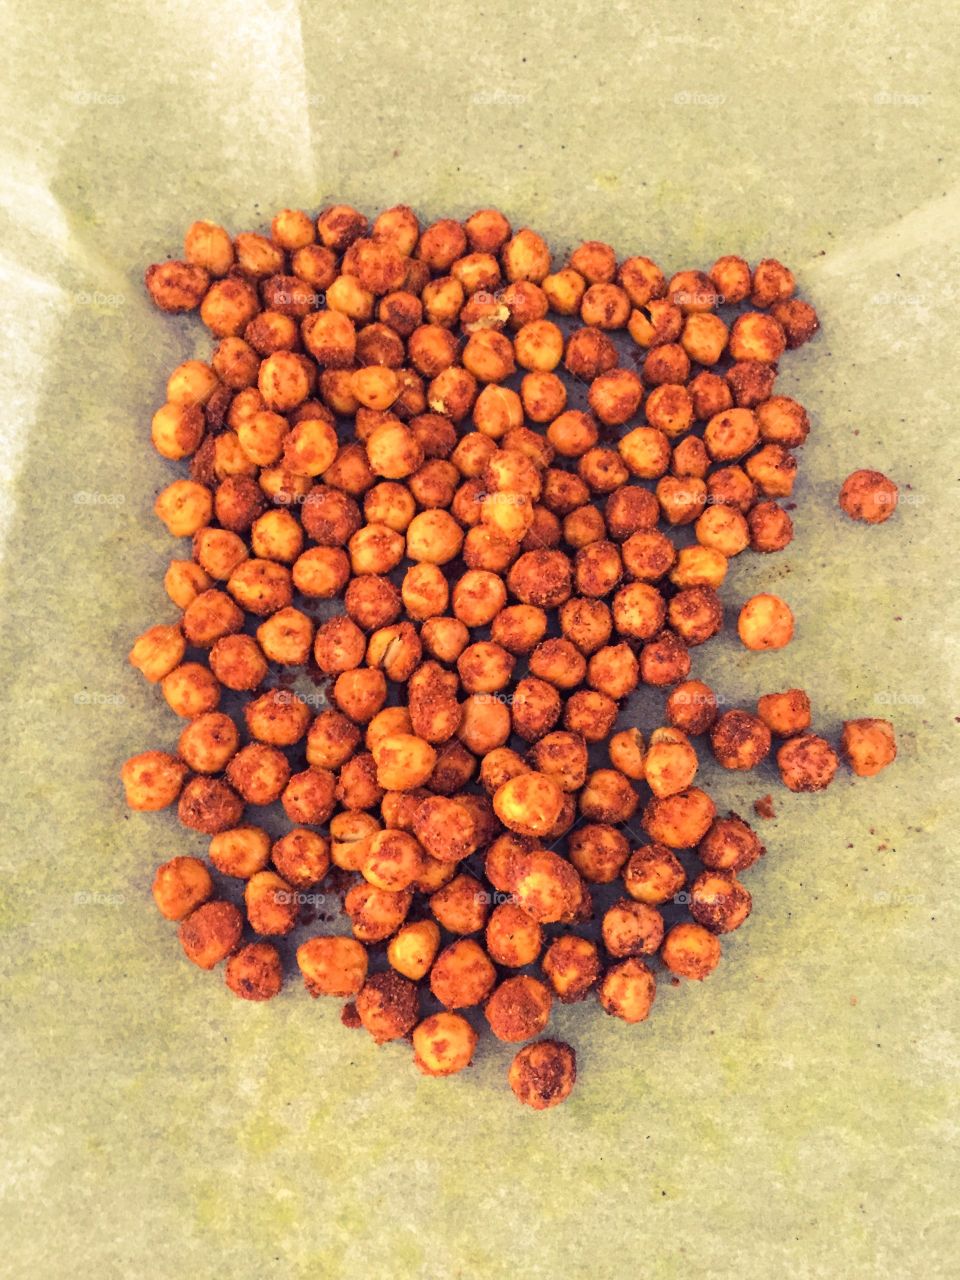 Roasted chickpeas on baking paper